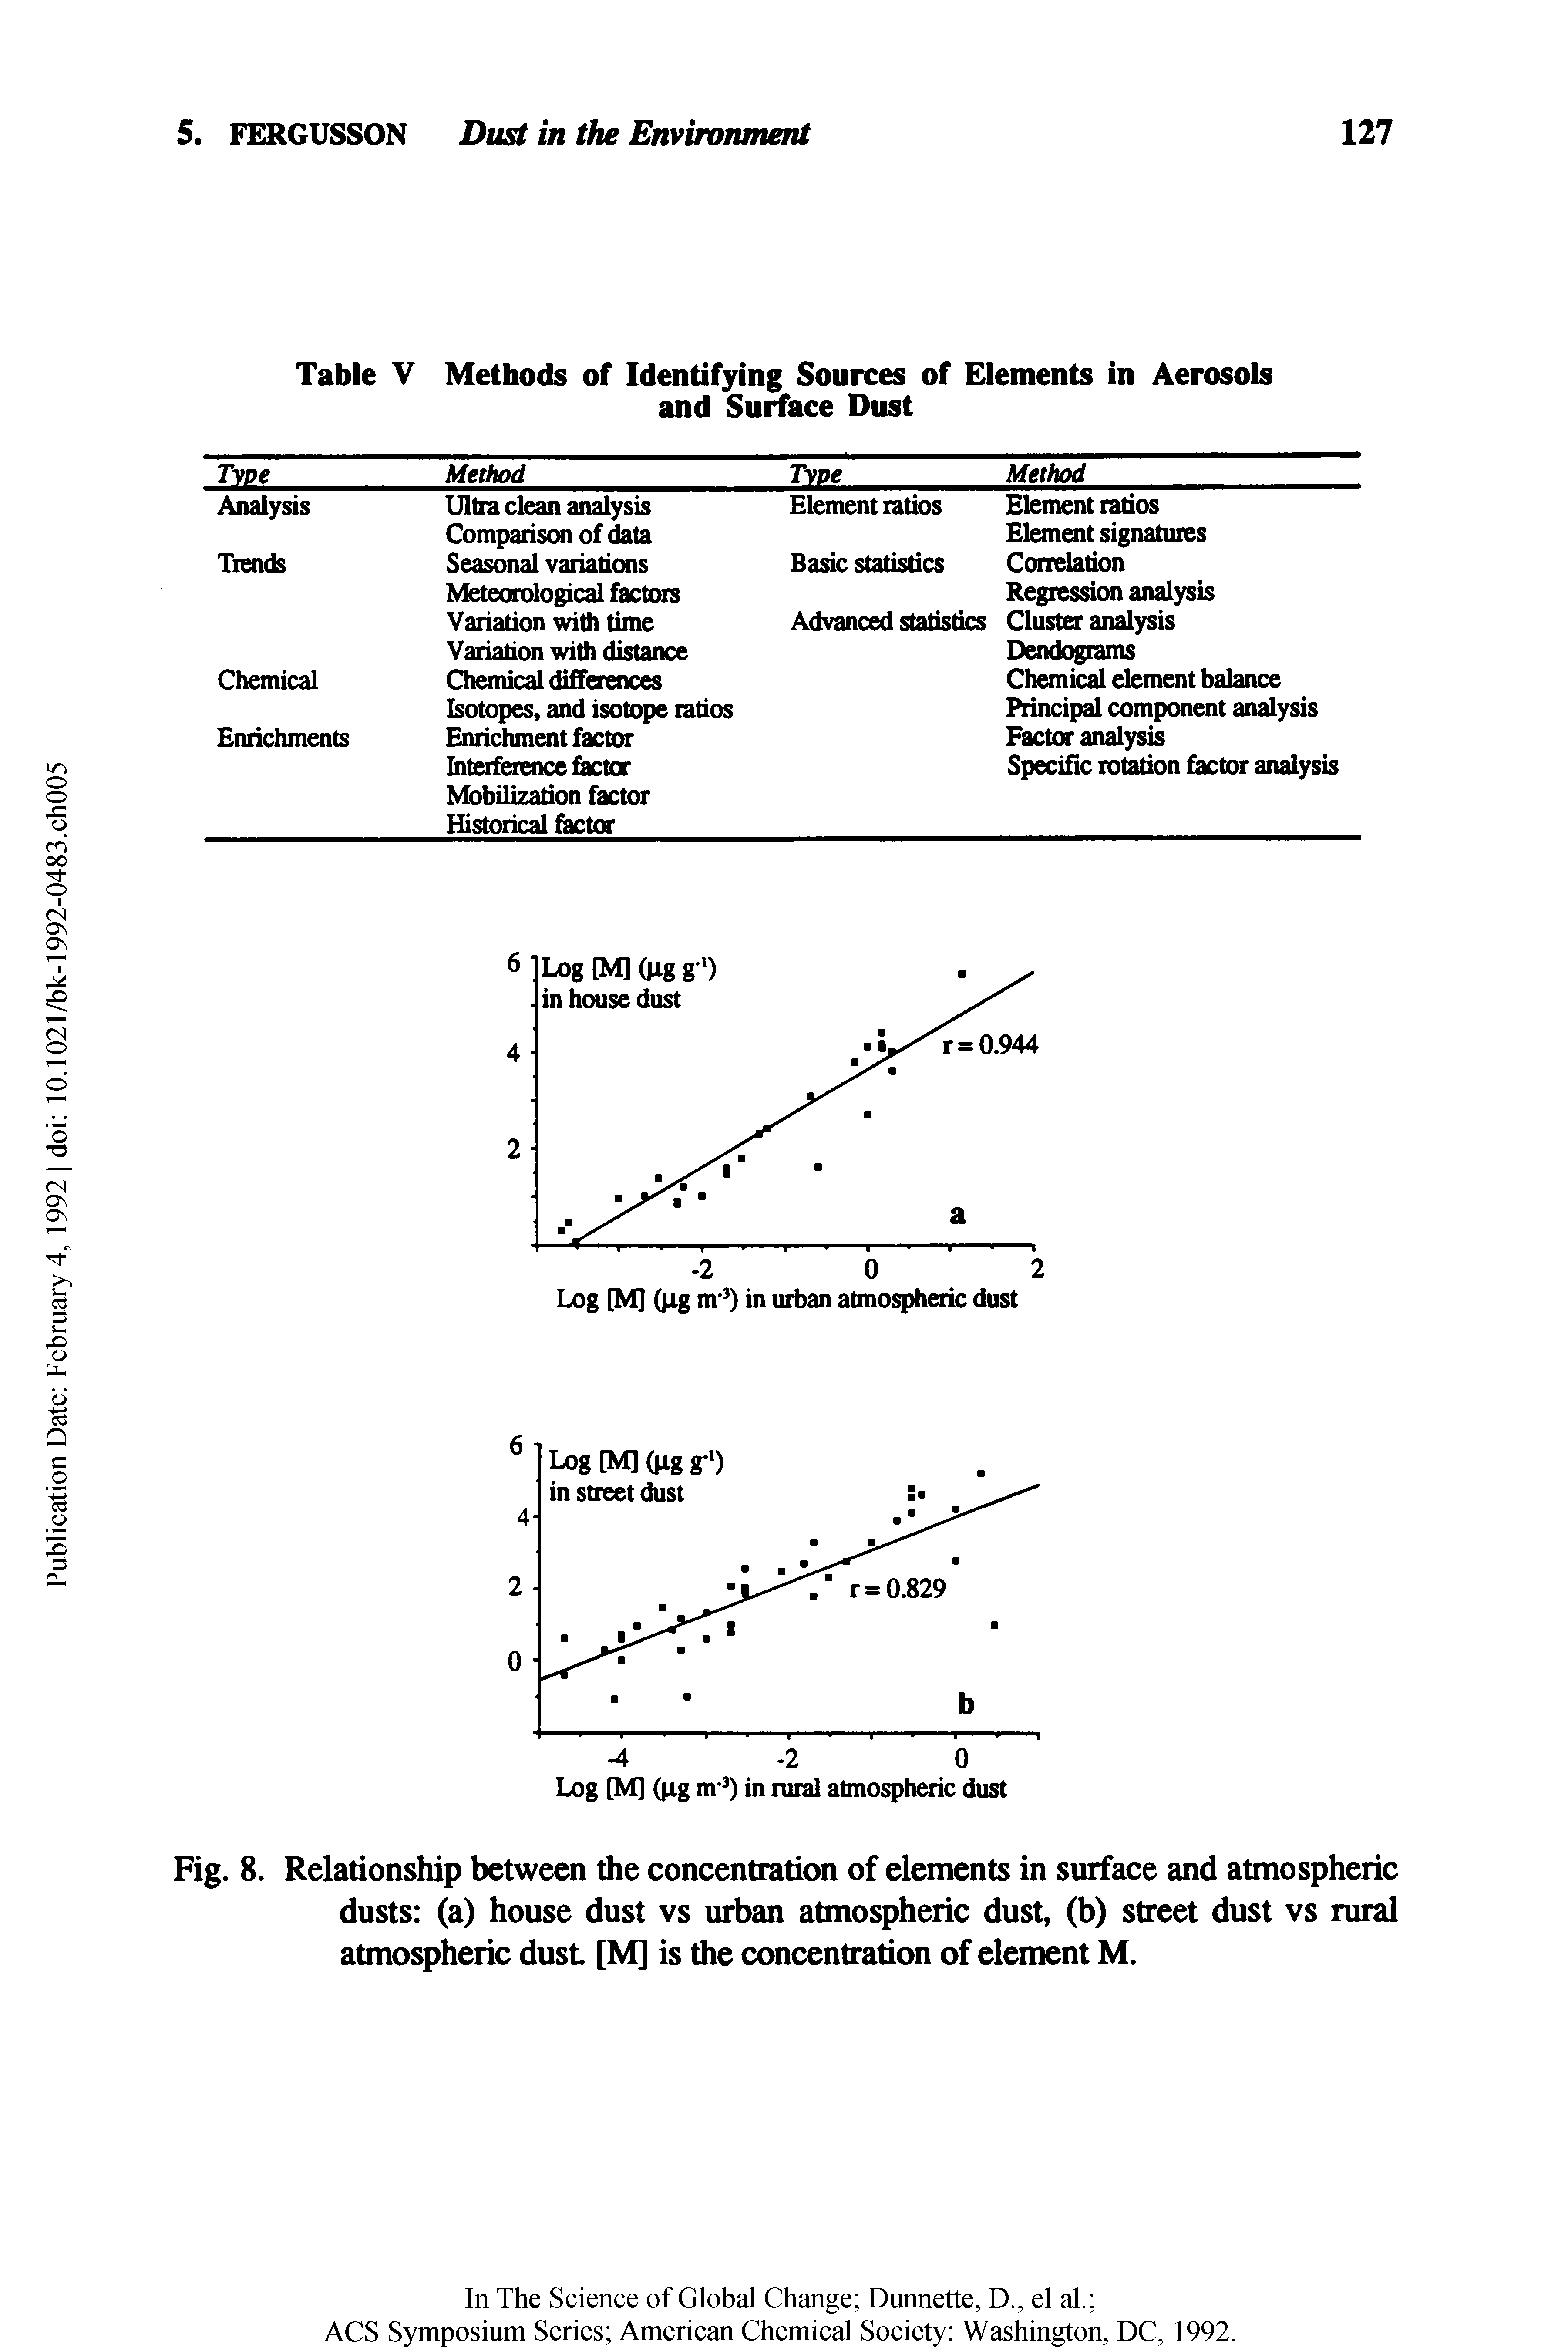 Fig. 8. Relationship between the concentration of elements in surface and atmospheric dusts (a) house dust vs urban atmospheric dust, (b) street dust vs rural atmospheric dust [M] is the concentration of element M.